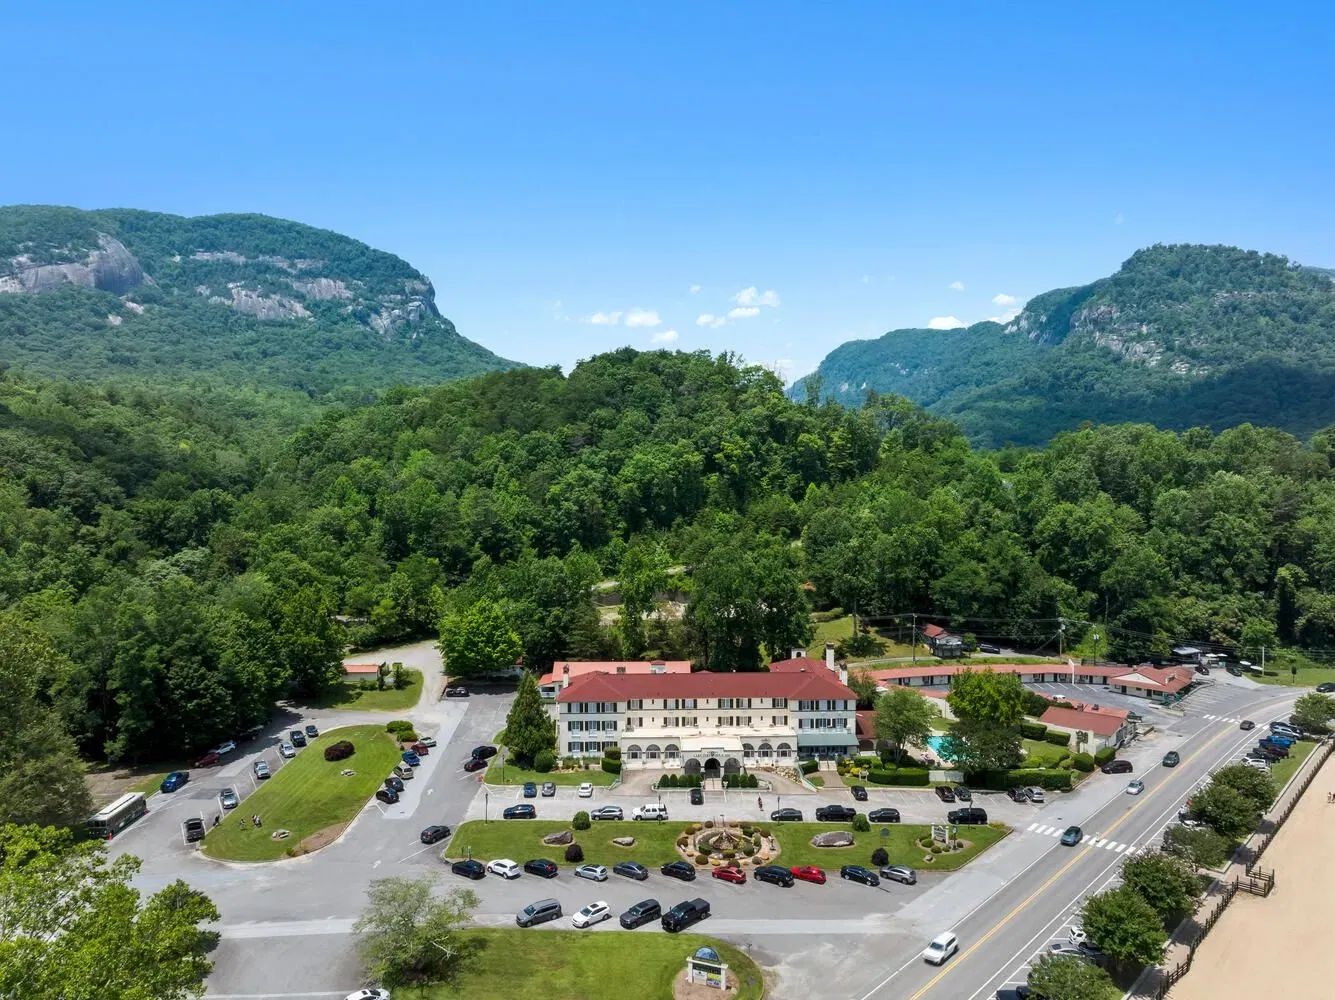 LAKE LURE INN HISTORIC DIRTY DANCING LOCATION SELLS FOR $11 MILLION